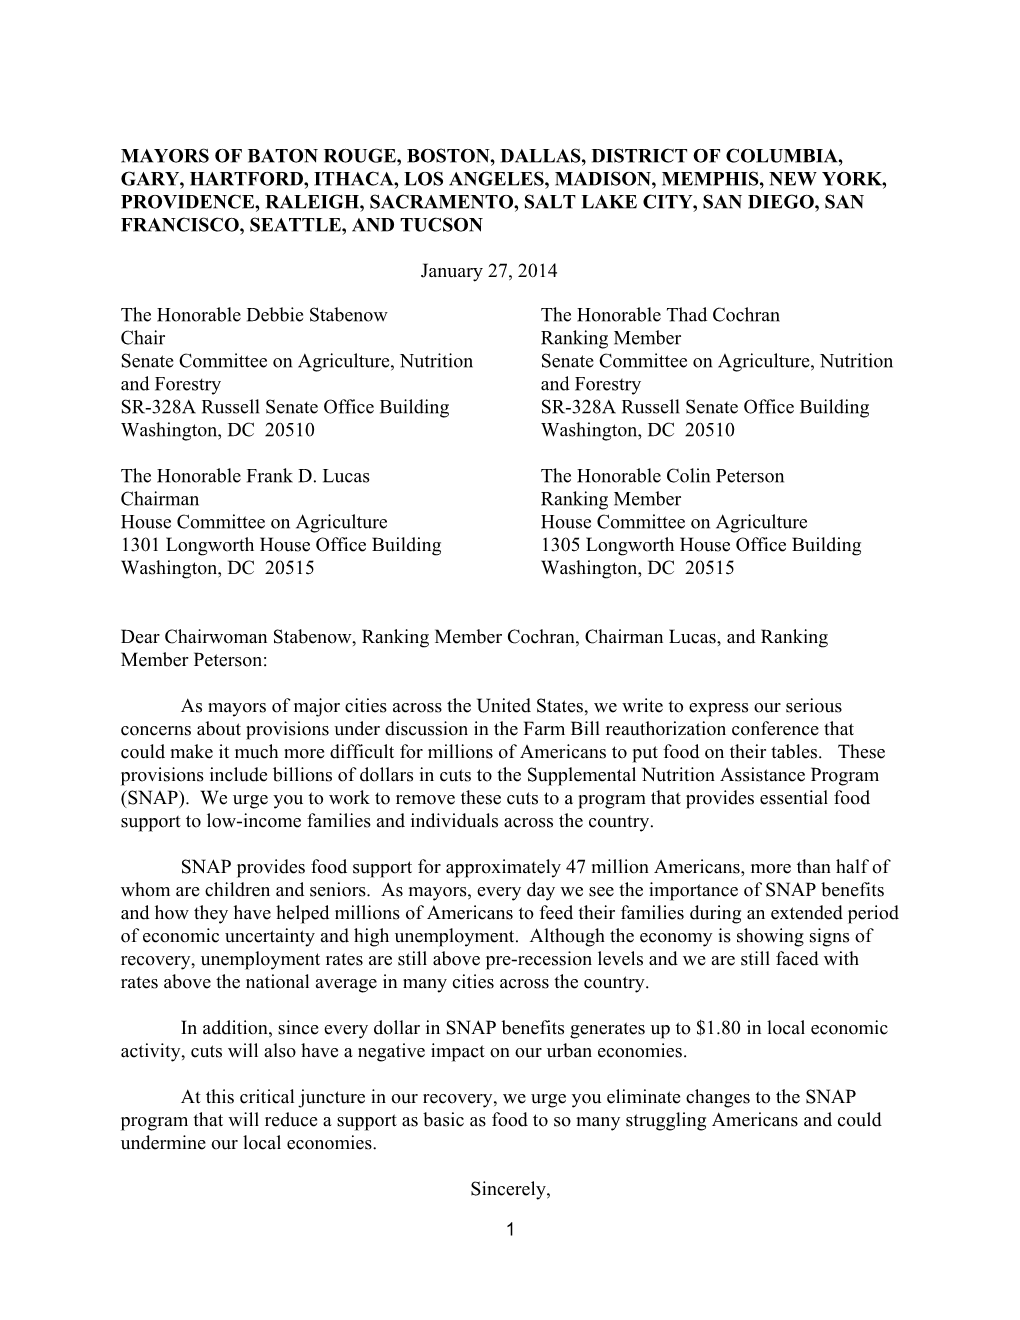 Letter from 19 Mayors Outlining the Importance of SNAP for Their